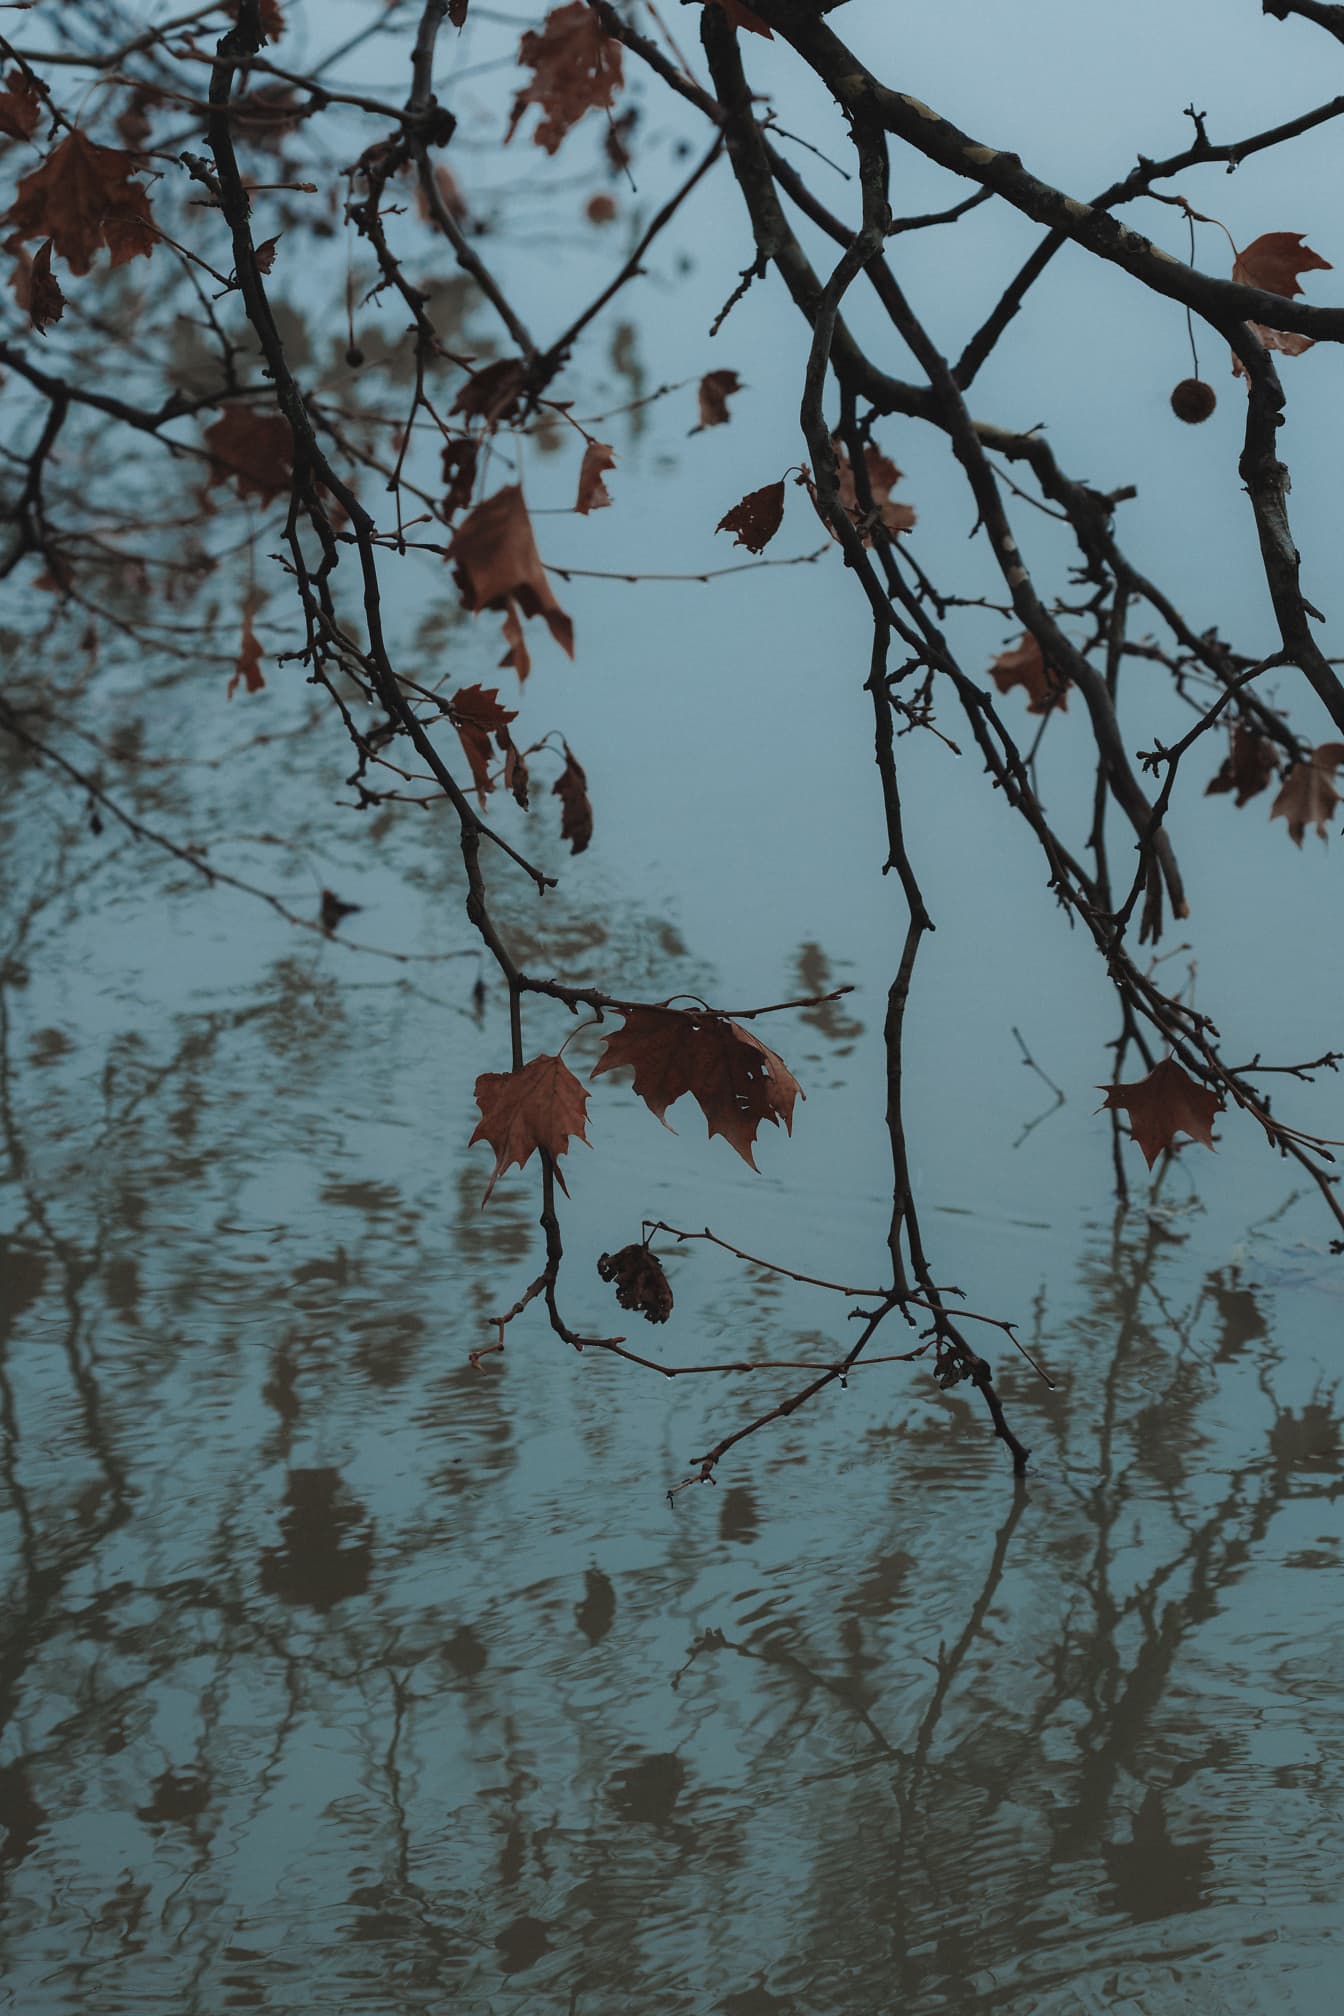 Dry yellowish brown leaves on branches with water reflection